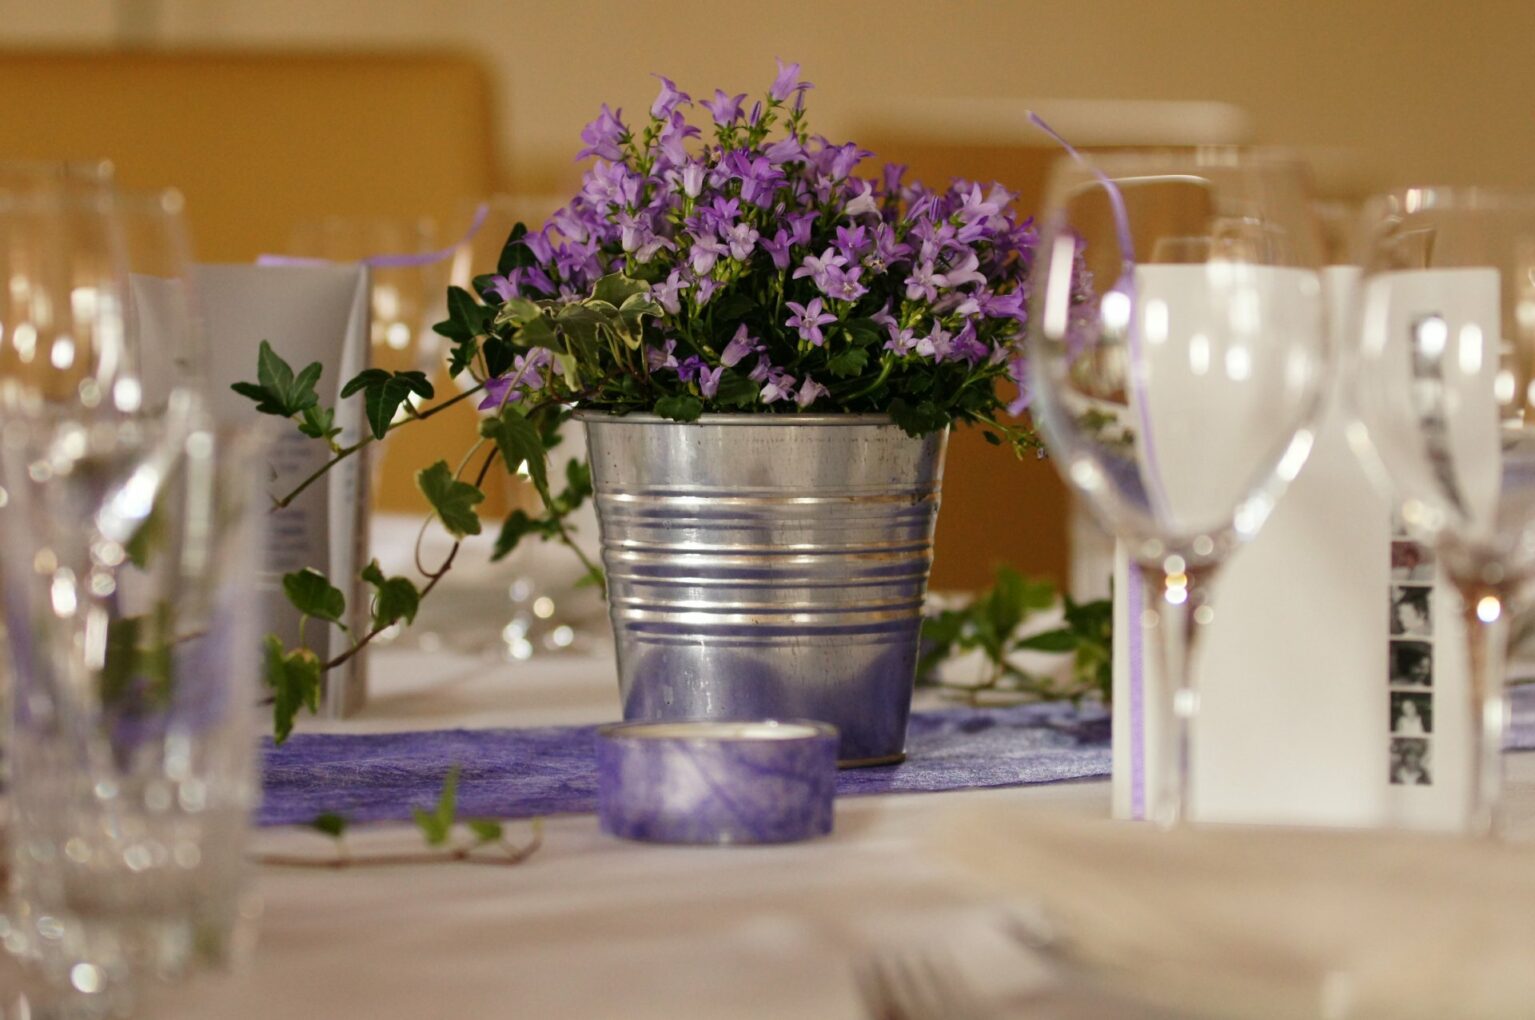 Decoration of a festive place setting